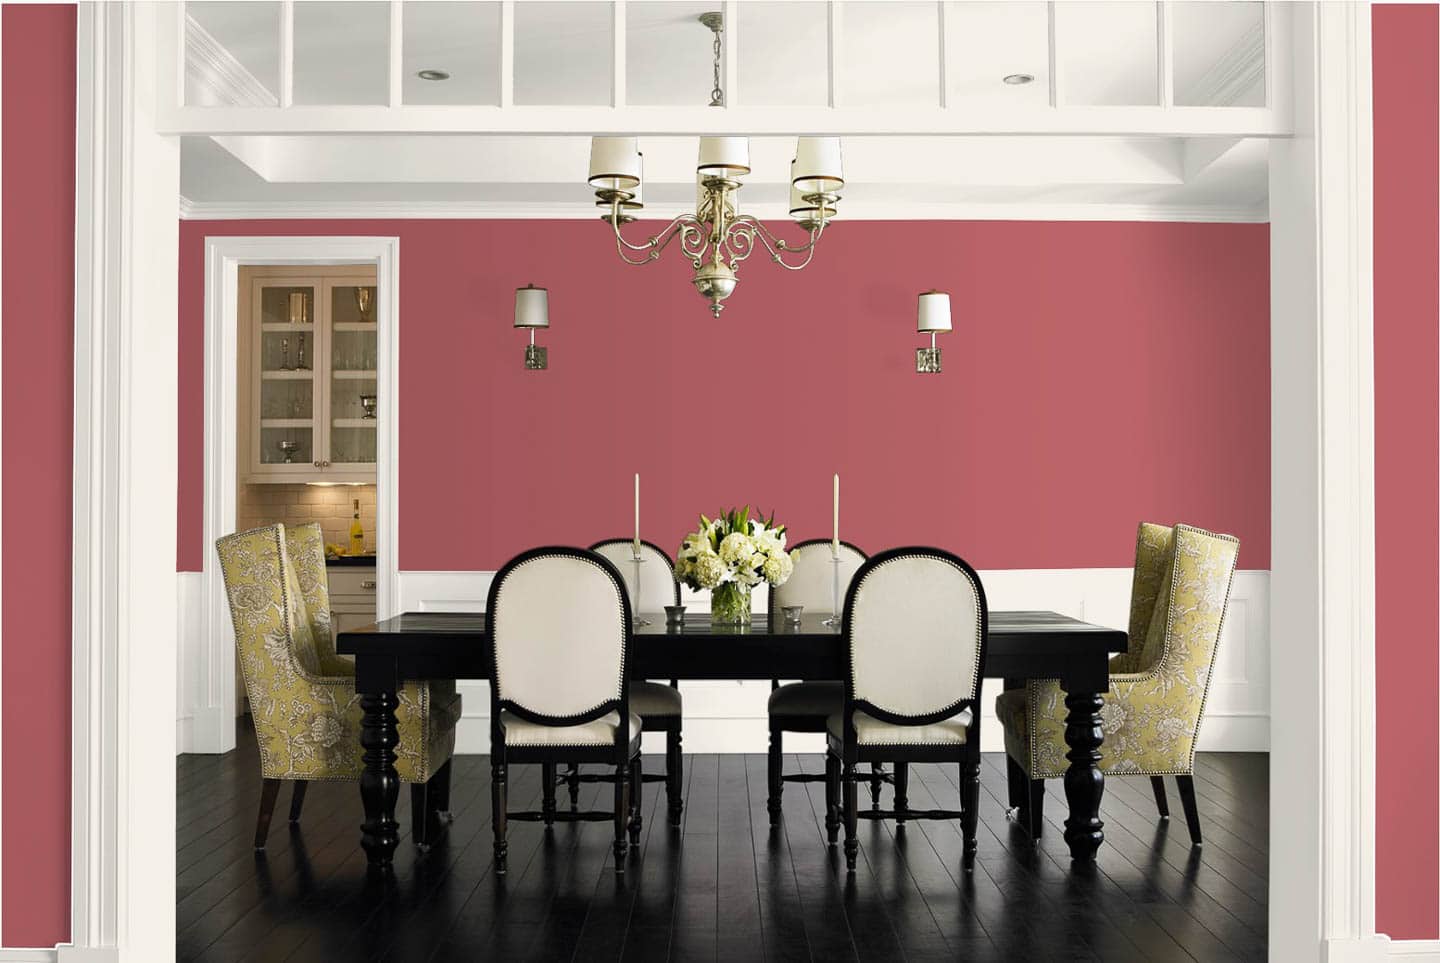 Dining room painted in Dunn Edwards 2023 color of the year 'Terra Rosa' with black and white furnishings